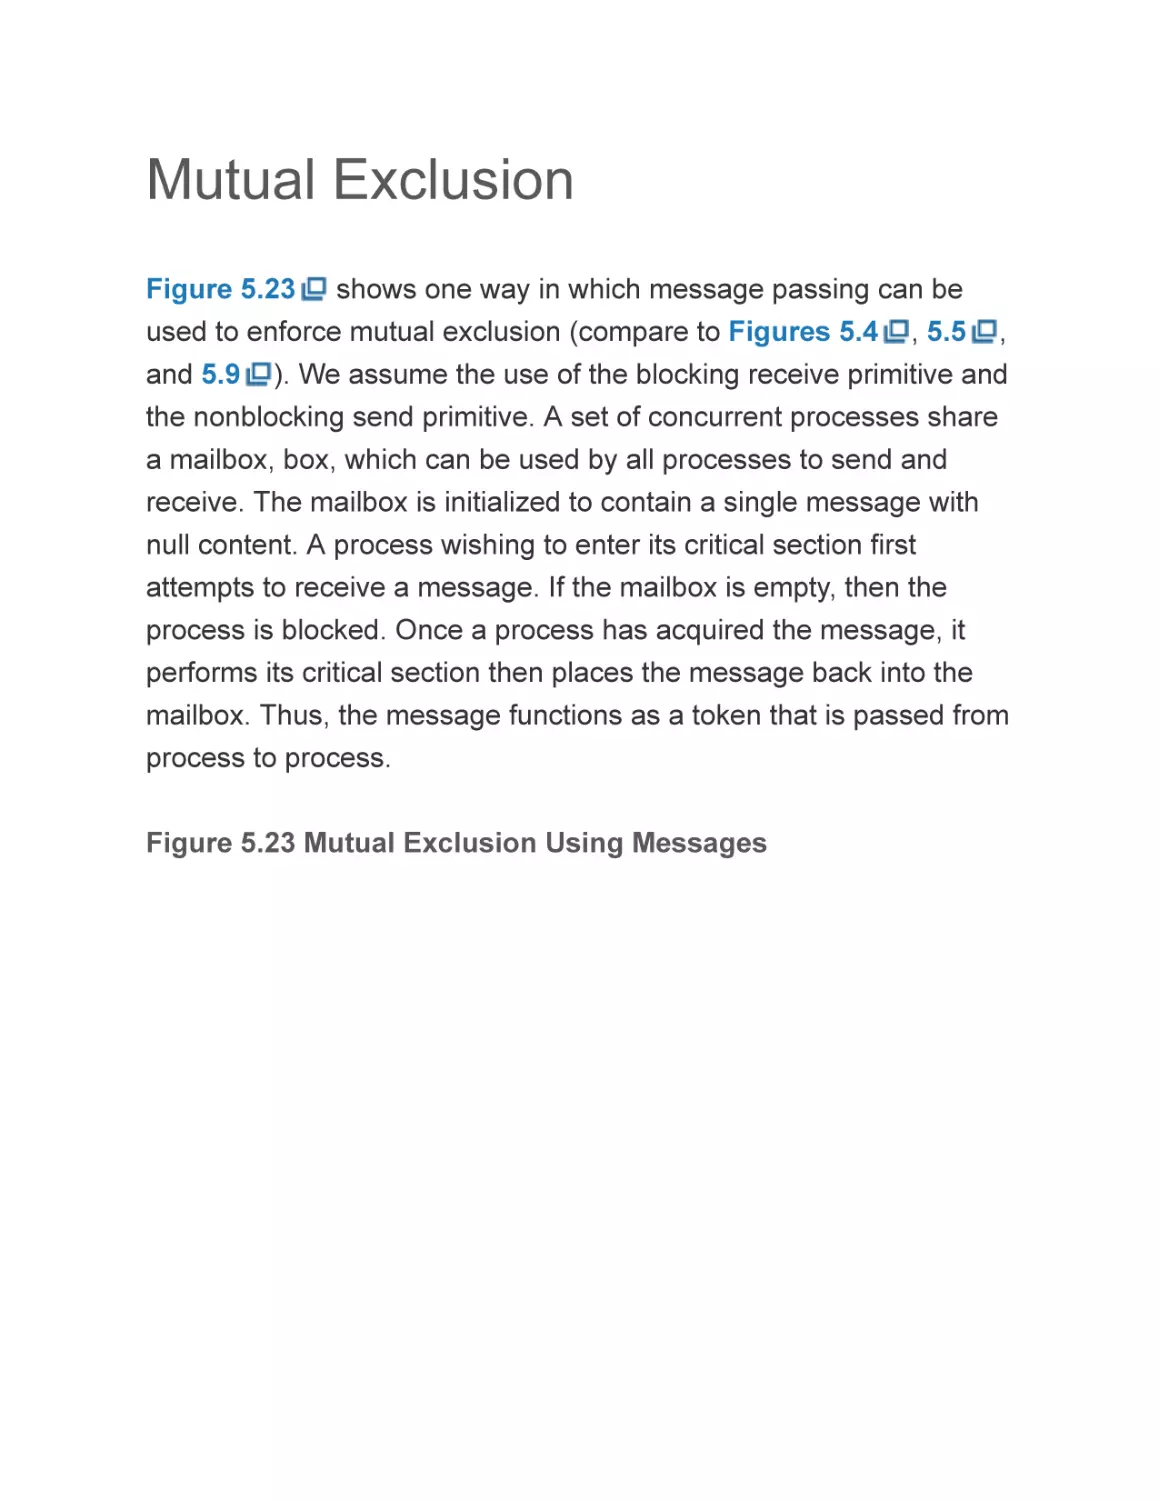 Mutual Exclusion